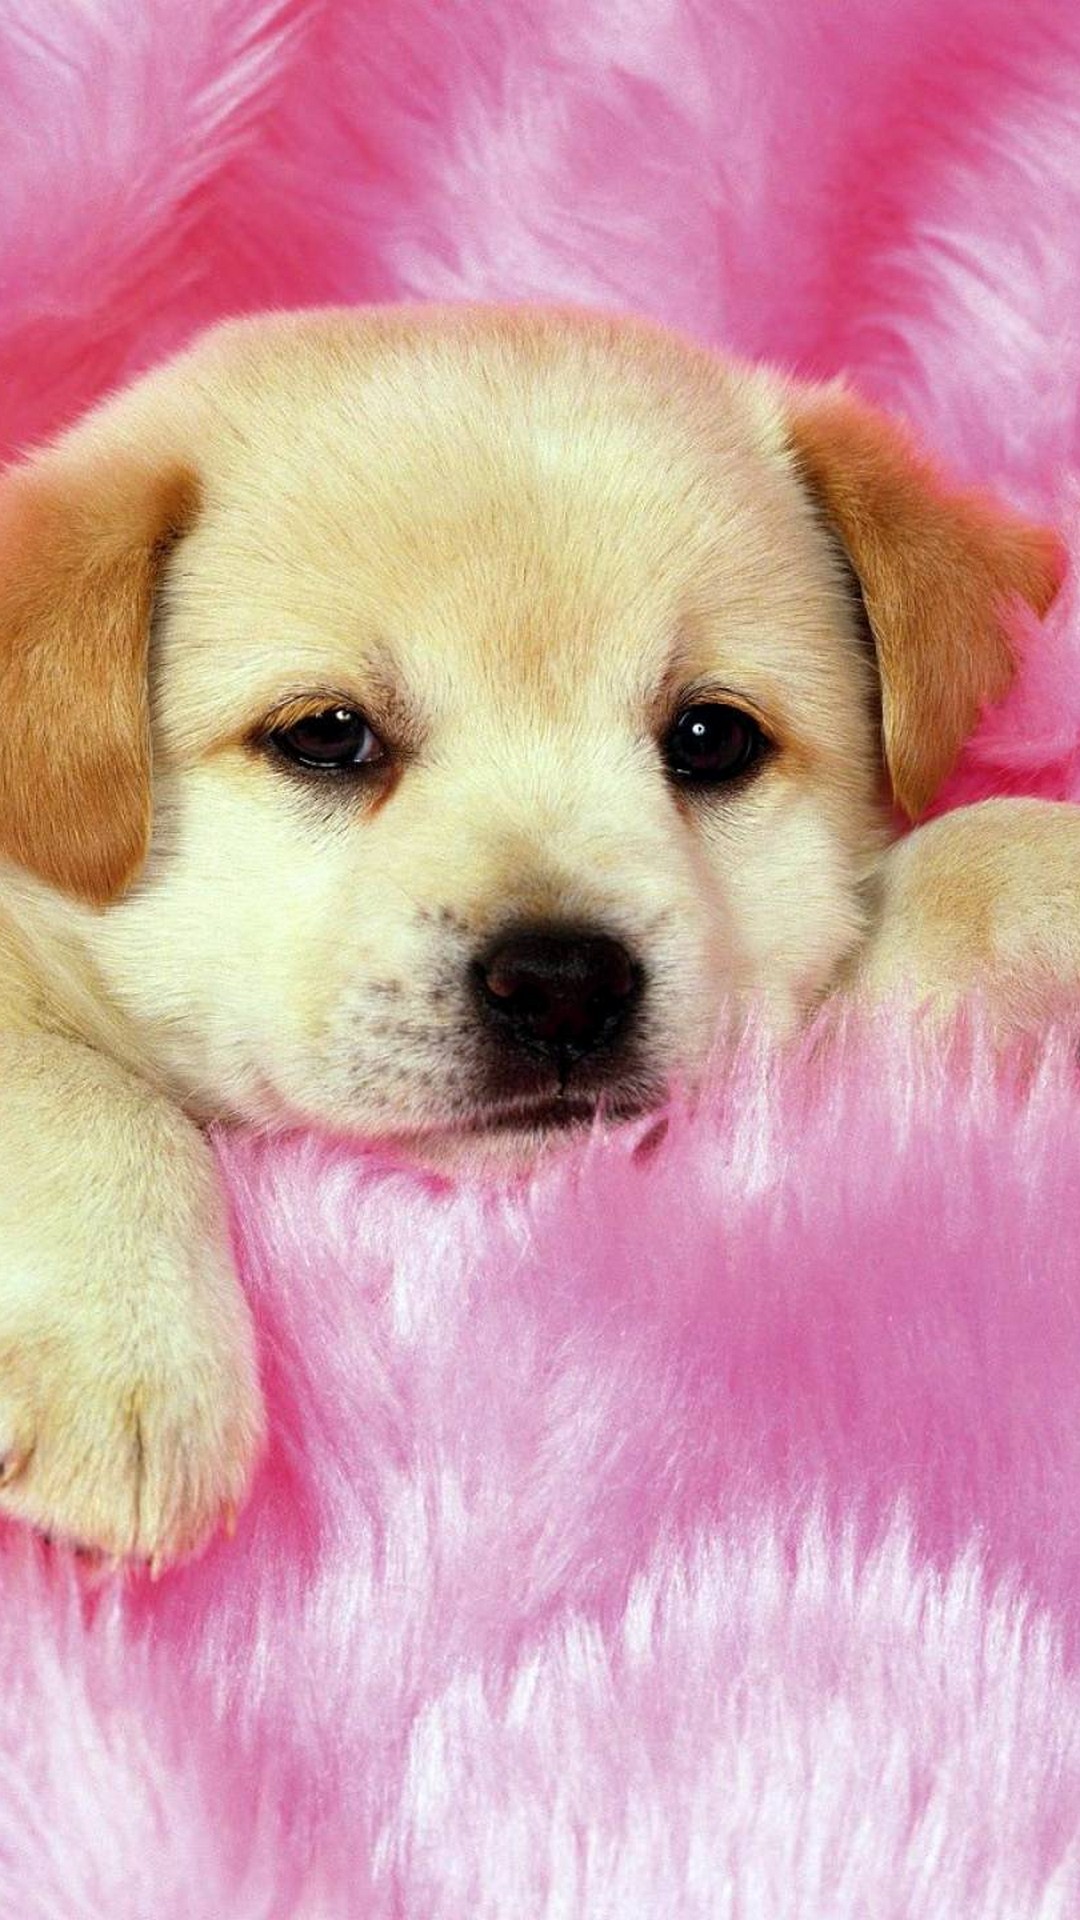 Puppy Wallpaper Android with HD resolution 1080x1920